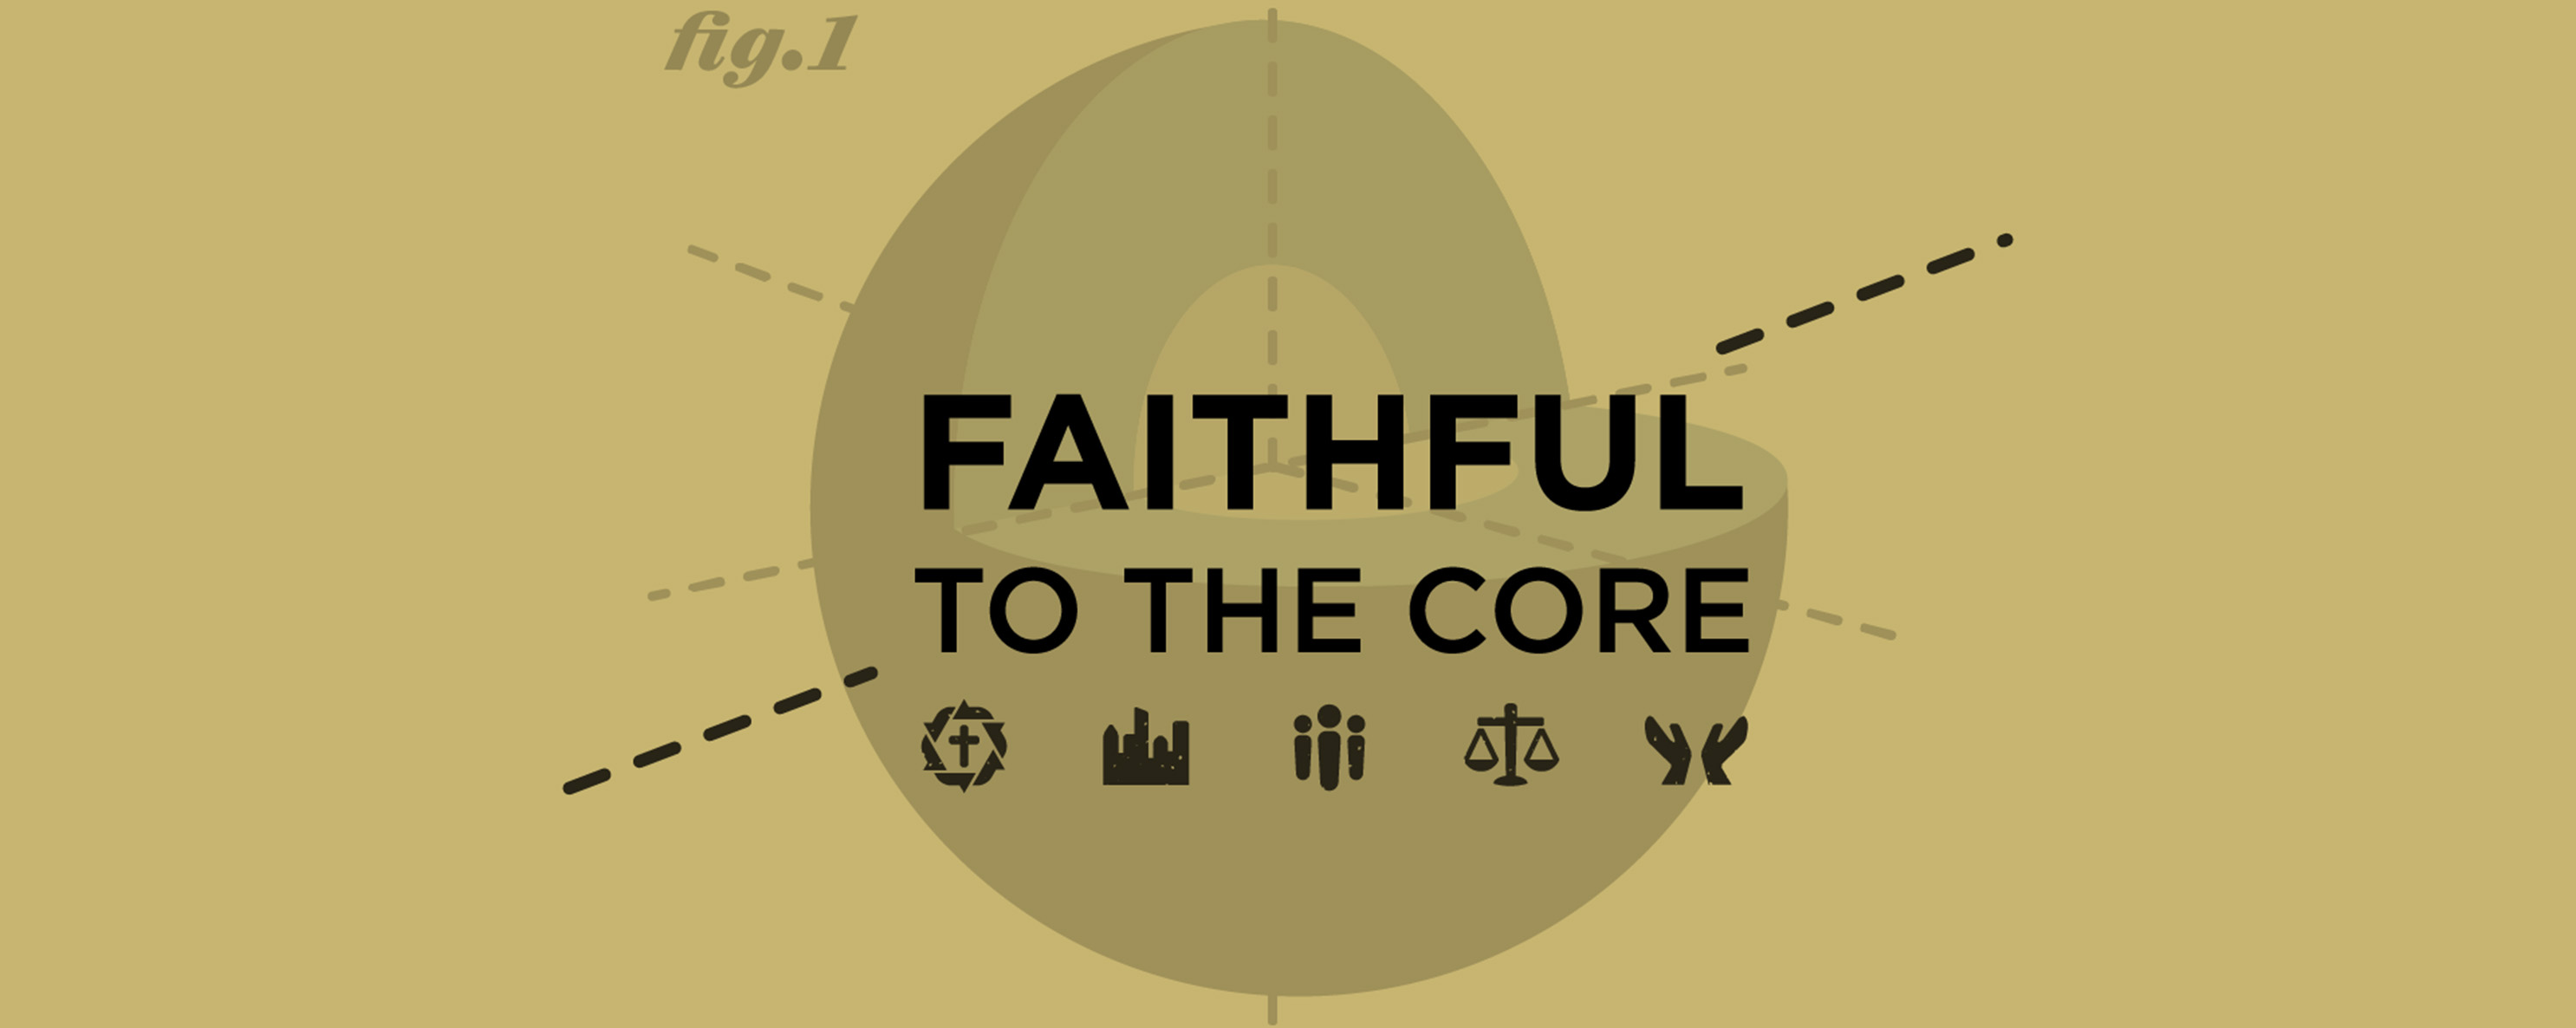 Faithful to the Core - 2020 banner